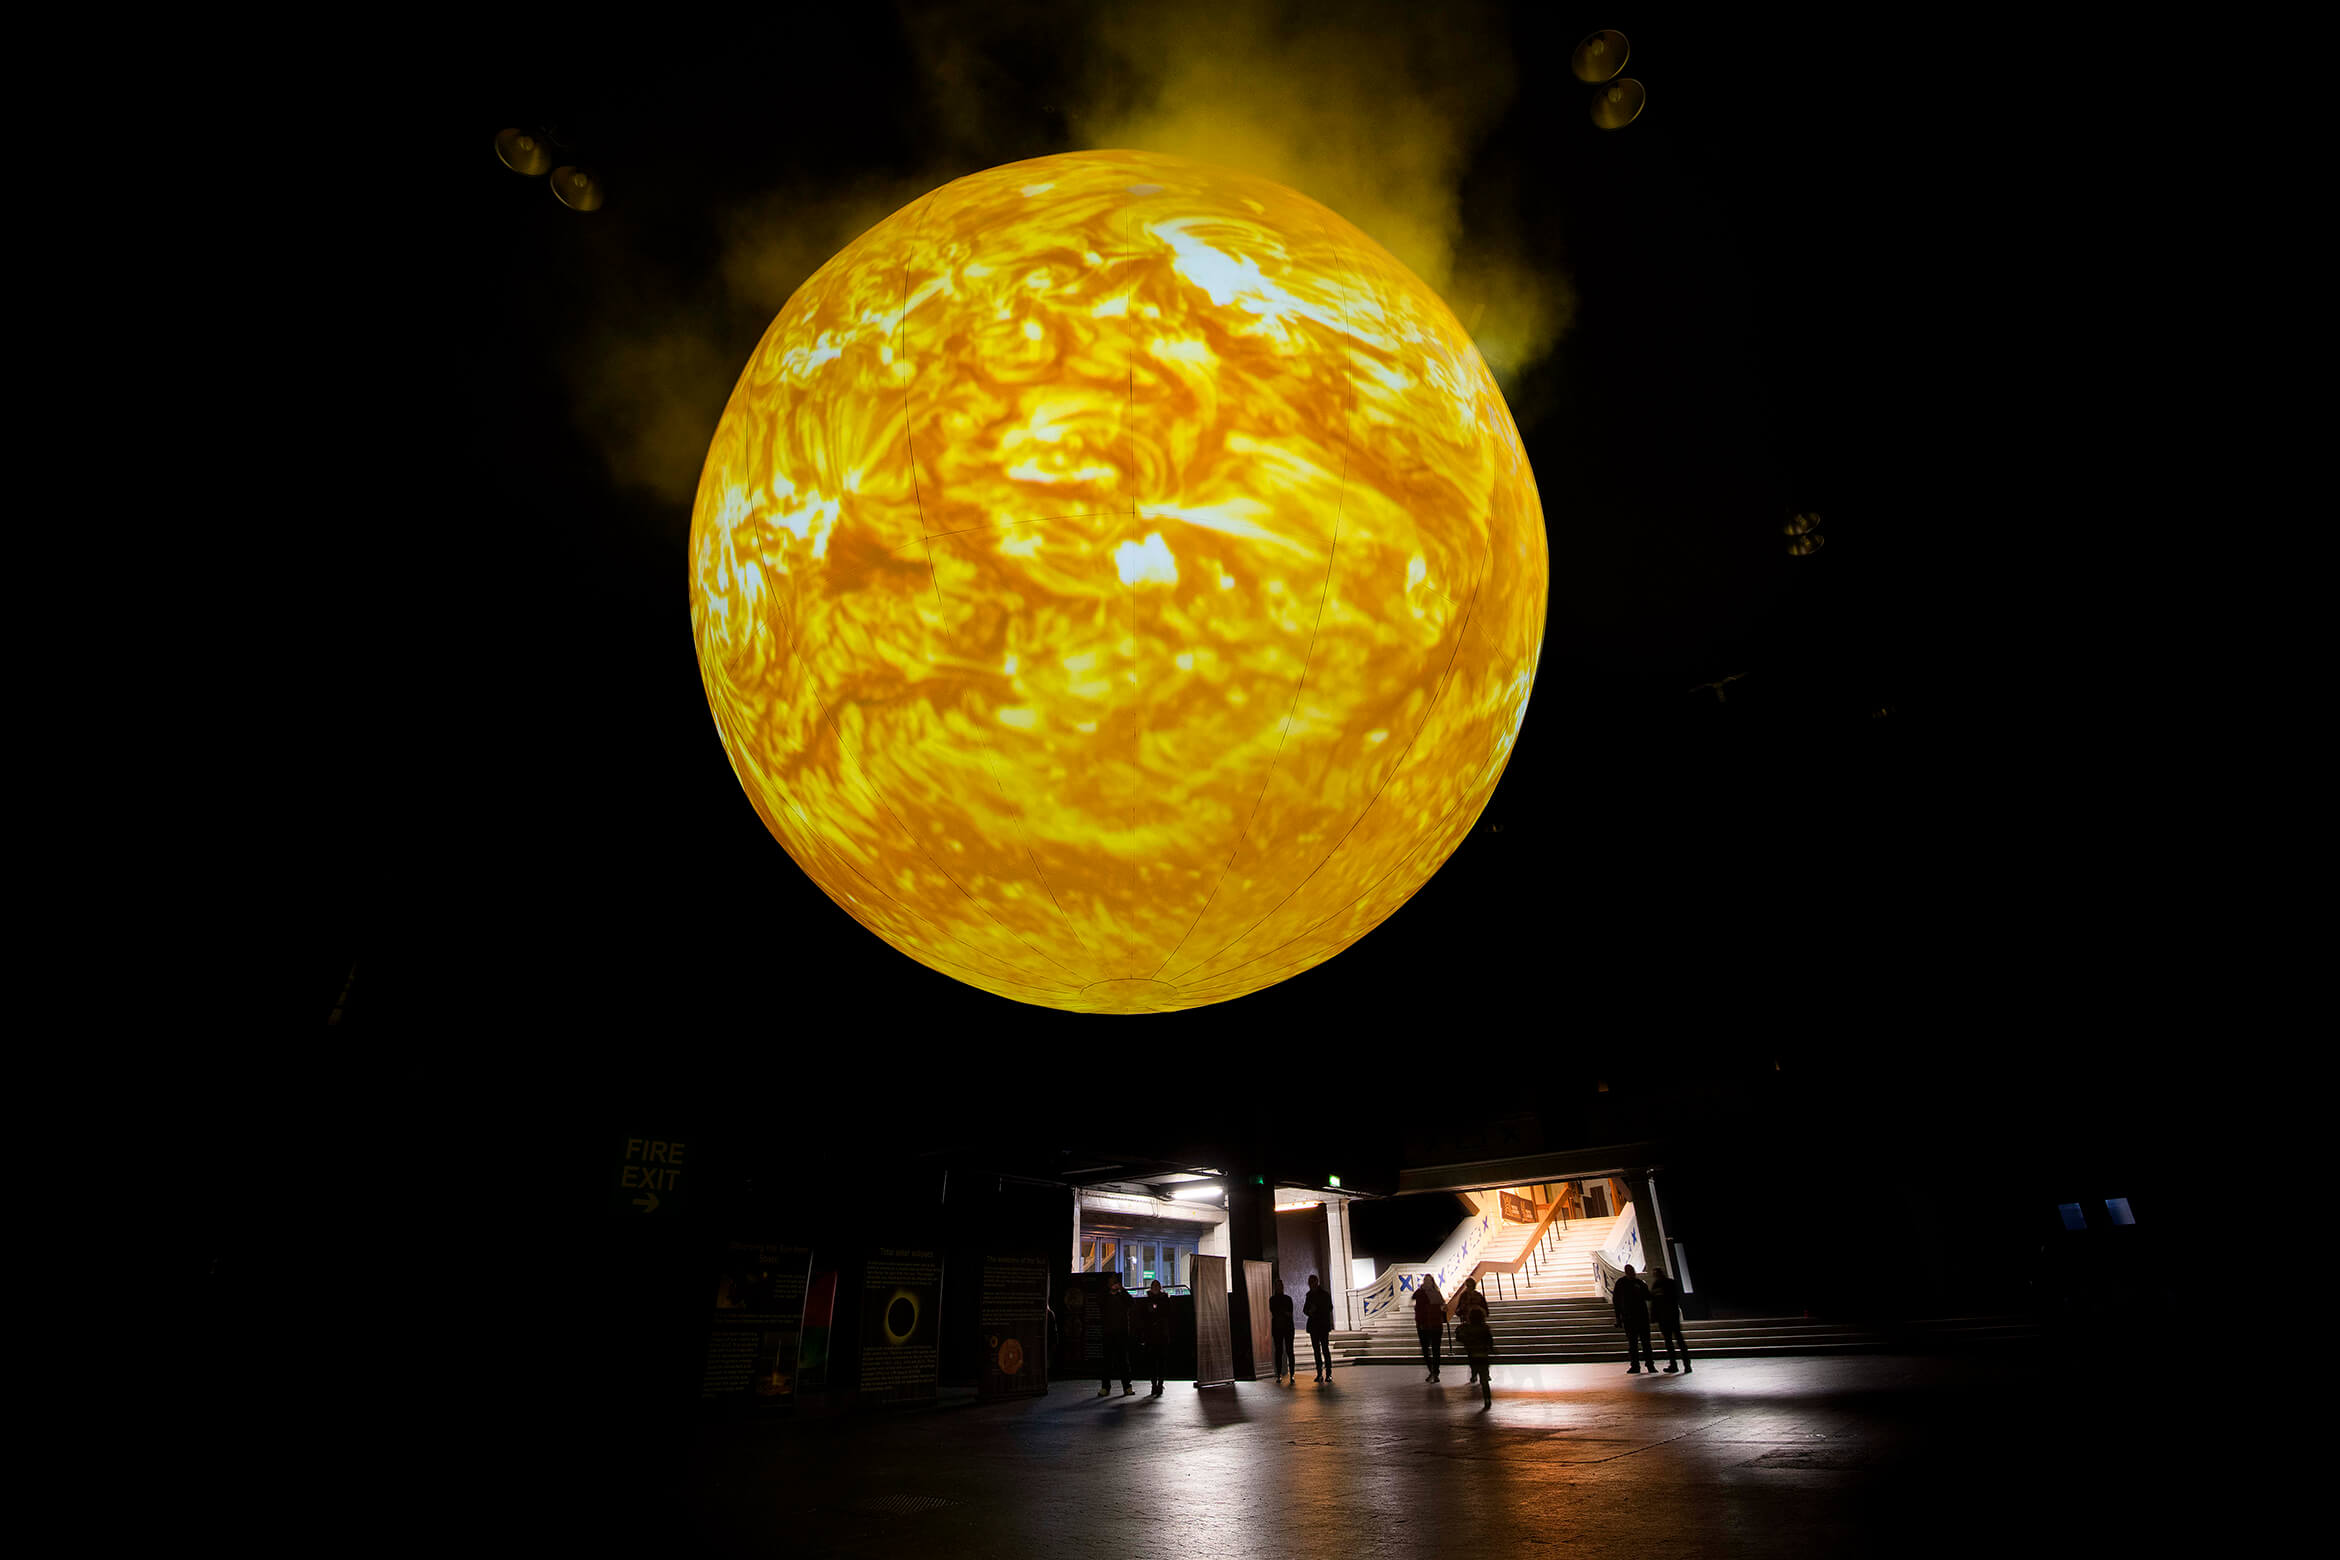 Photograph of SUN showing the scale compared to the people and space it is in